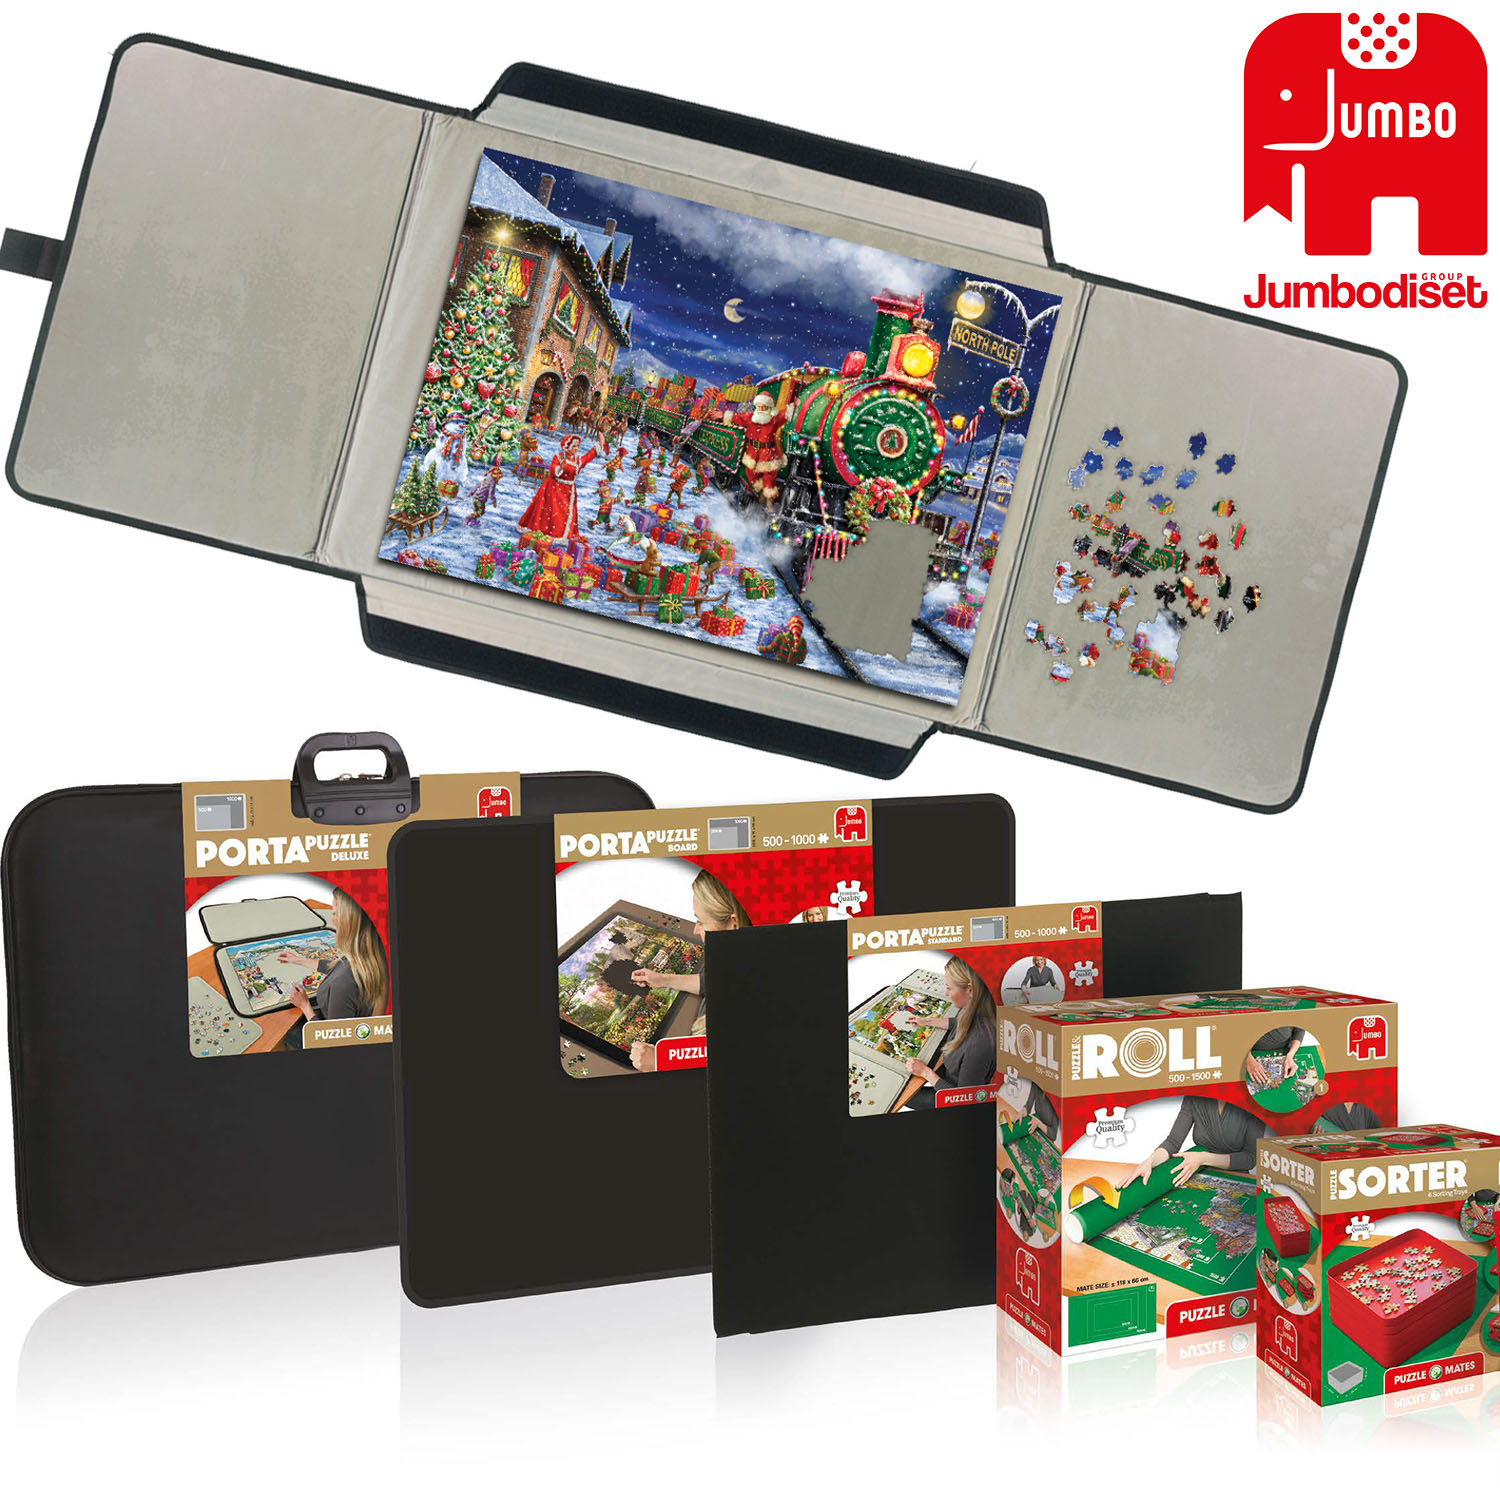 Portapuzzle Deluxe 1000 Piece Jigsaw Puzzle Case - The Ideal Solution